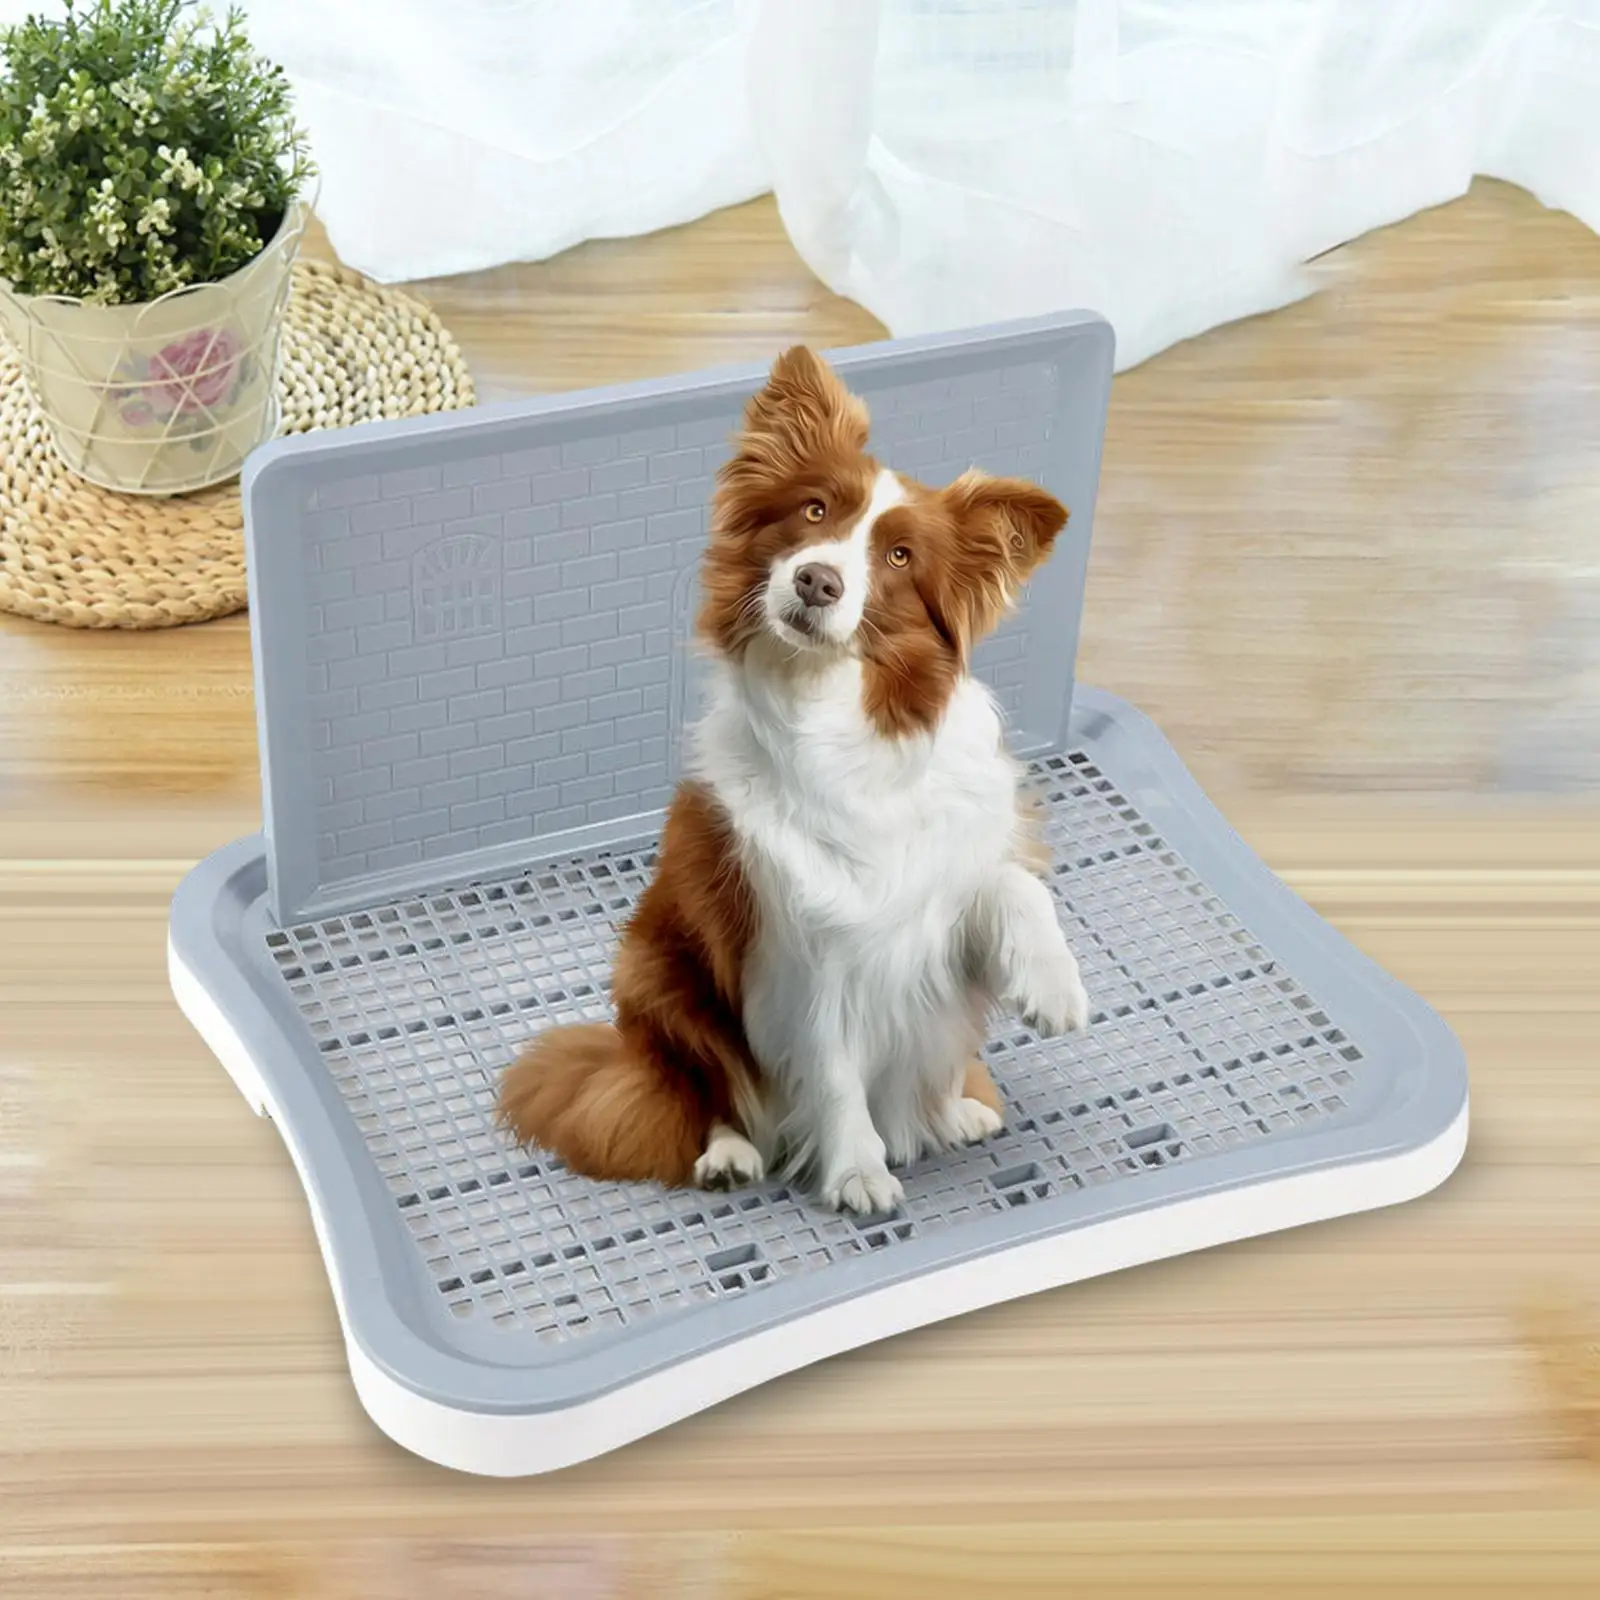 Dog Toilet Mesh Grids Keep Paws and Floors Clean Puppy Pee Pad Pet Training Toilet Tray for Small and Medium Dogs Puppy Hamster